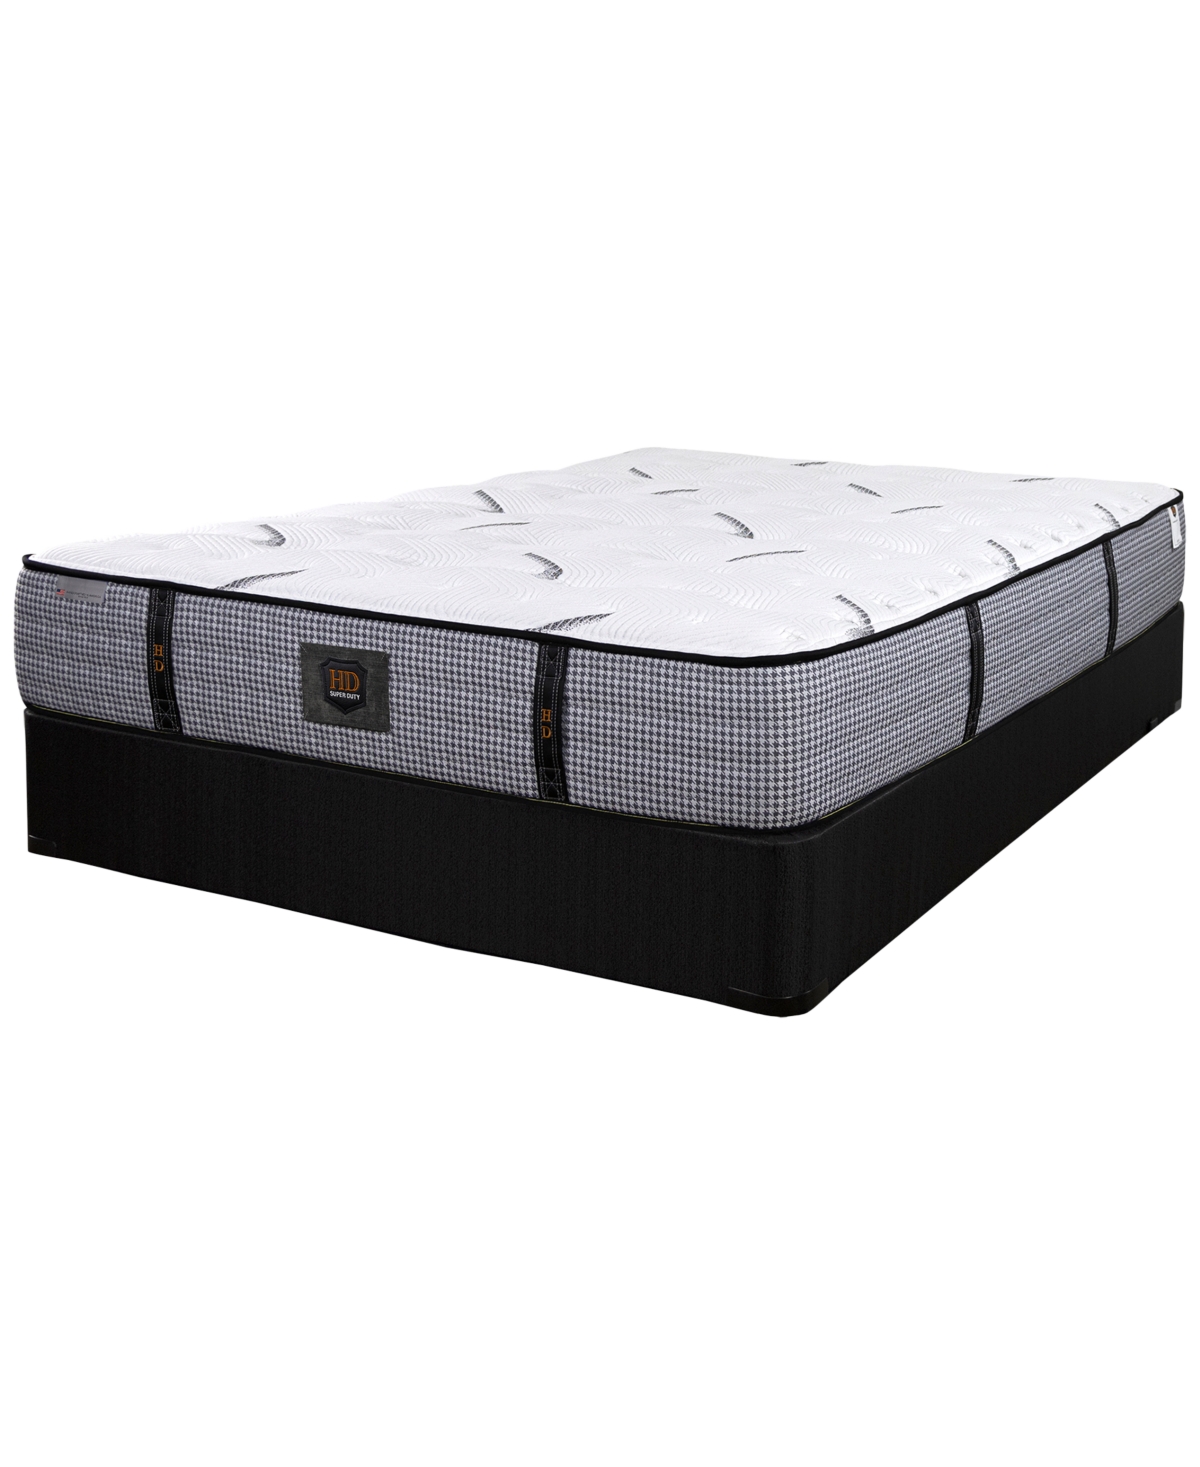 Shop Paramount Hd Granite 11" Extra Firm Mattress In No Color